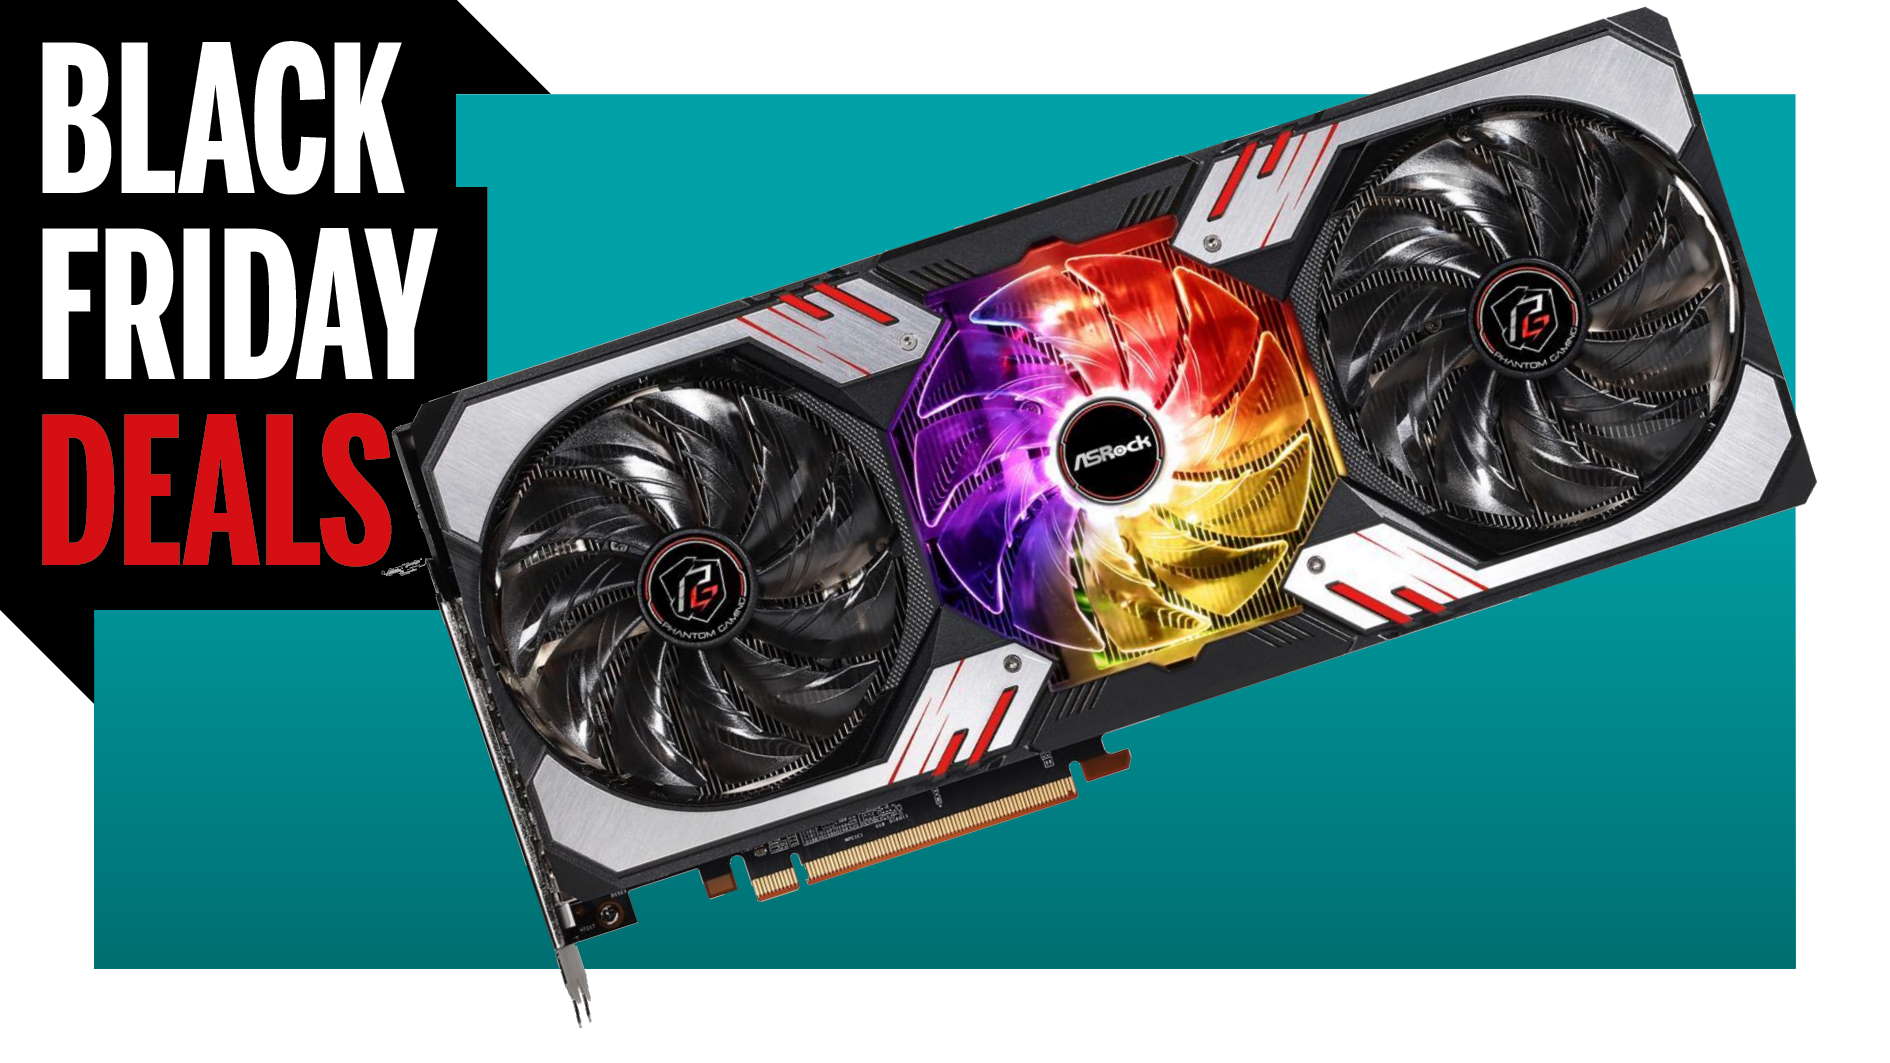  Hold the press, we've actually found a Black Friday graphics card deal: $100 off an AMD RX 6900 XT 